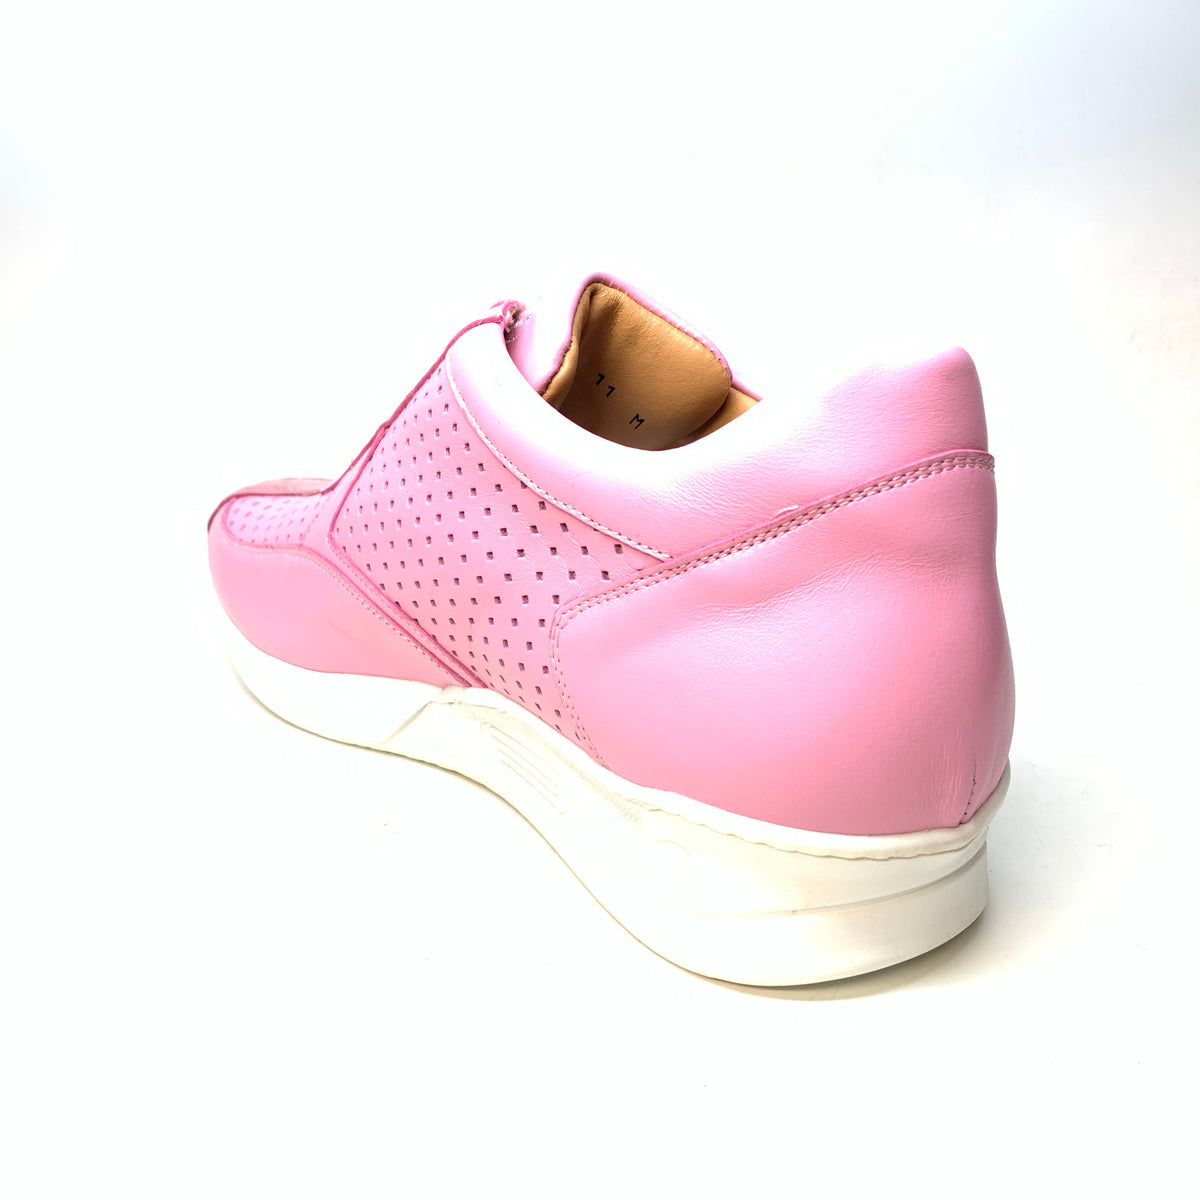 Mauri M770 Pink Crocodile Perforated Nappa Leather Sneaker - Dudes Boutique